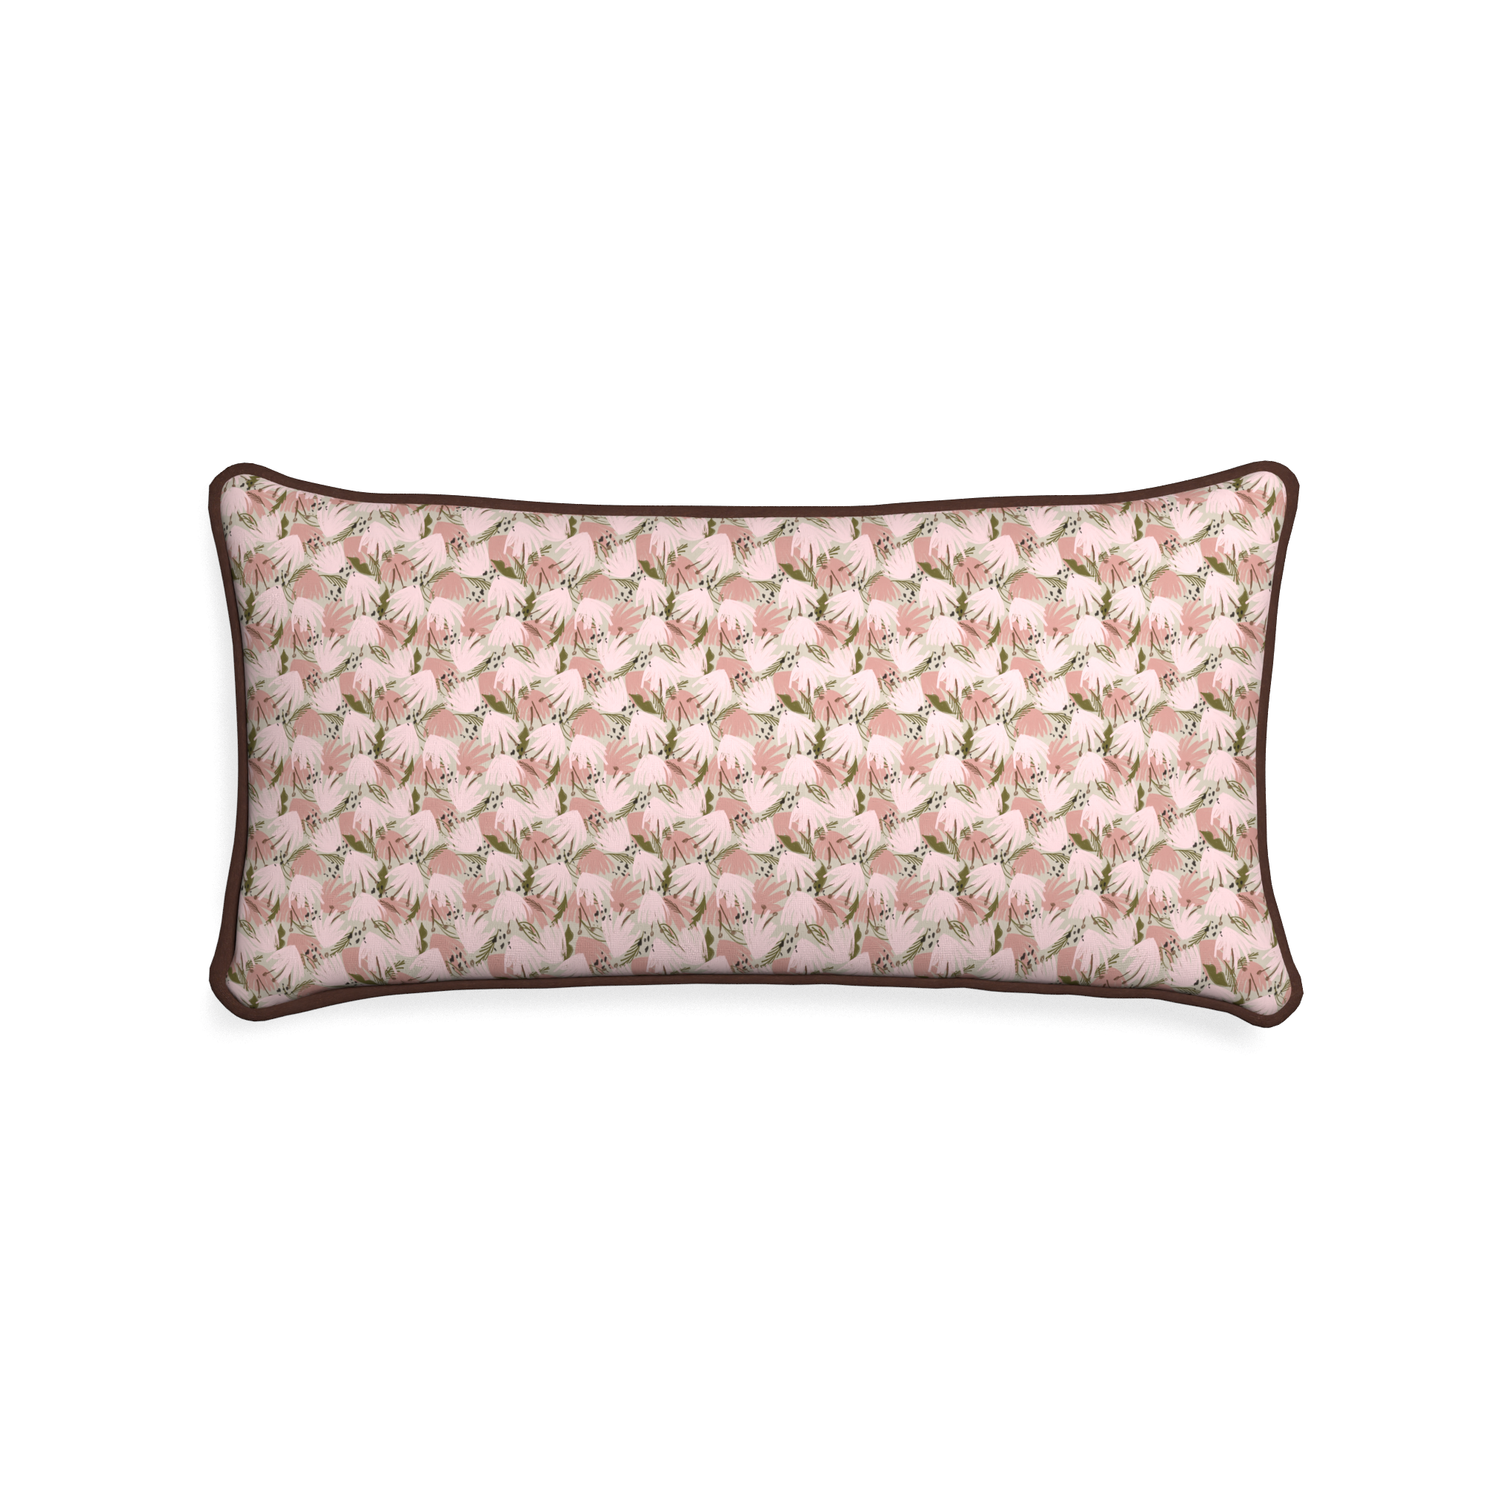 Midi-lumbar eden pink custom pink floralpillow with w piping on white background